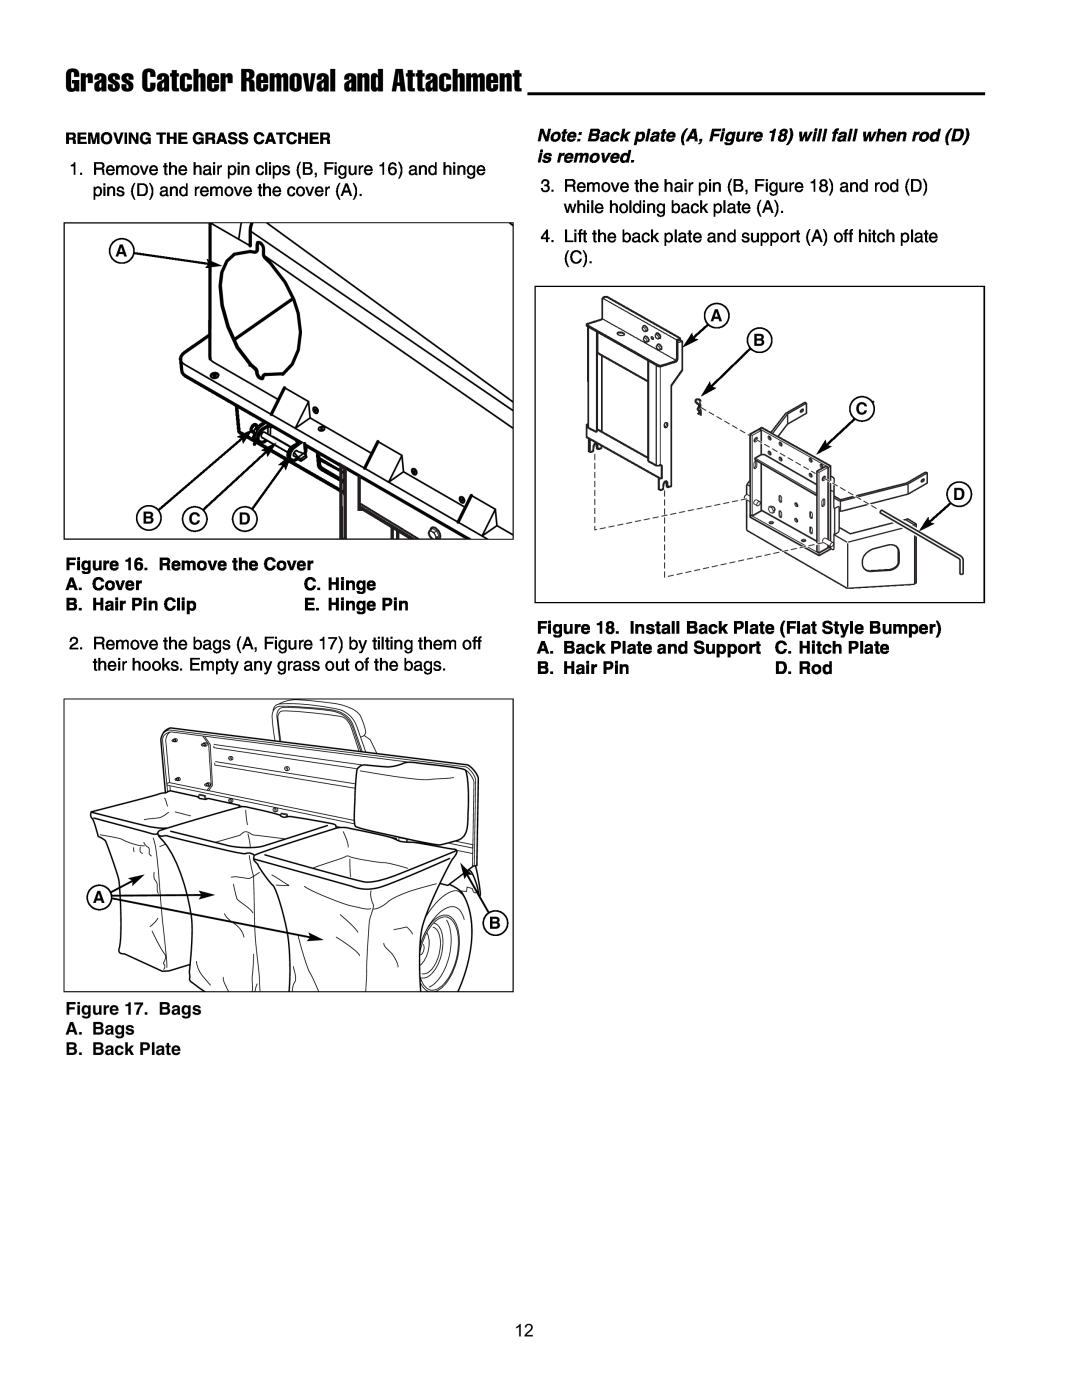 Briggs & Stratton 5900703 manual Grass Catcher Removal and Attachment, Note Back plate A, will fall when rod D is removed 